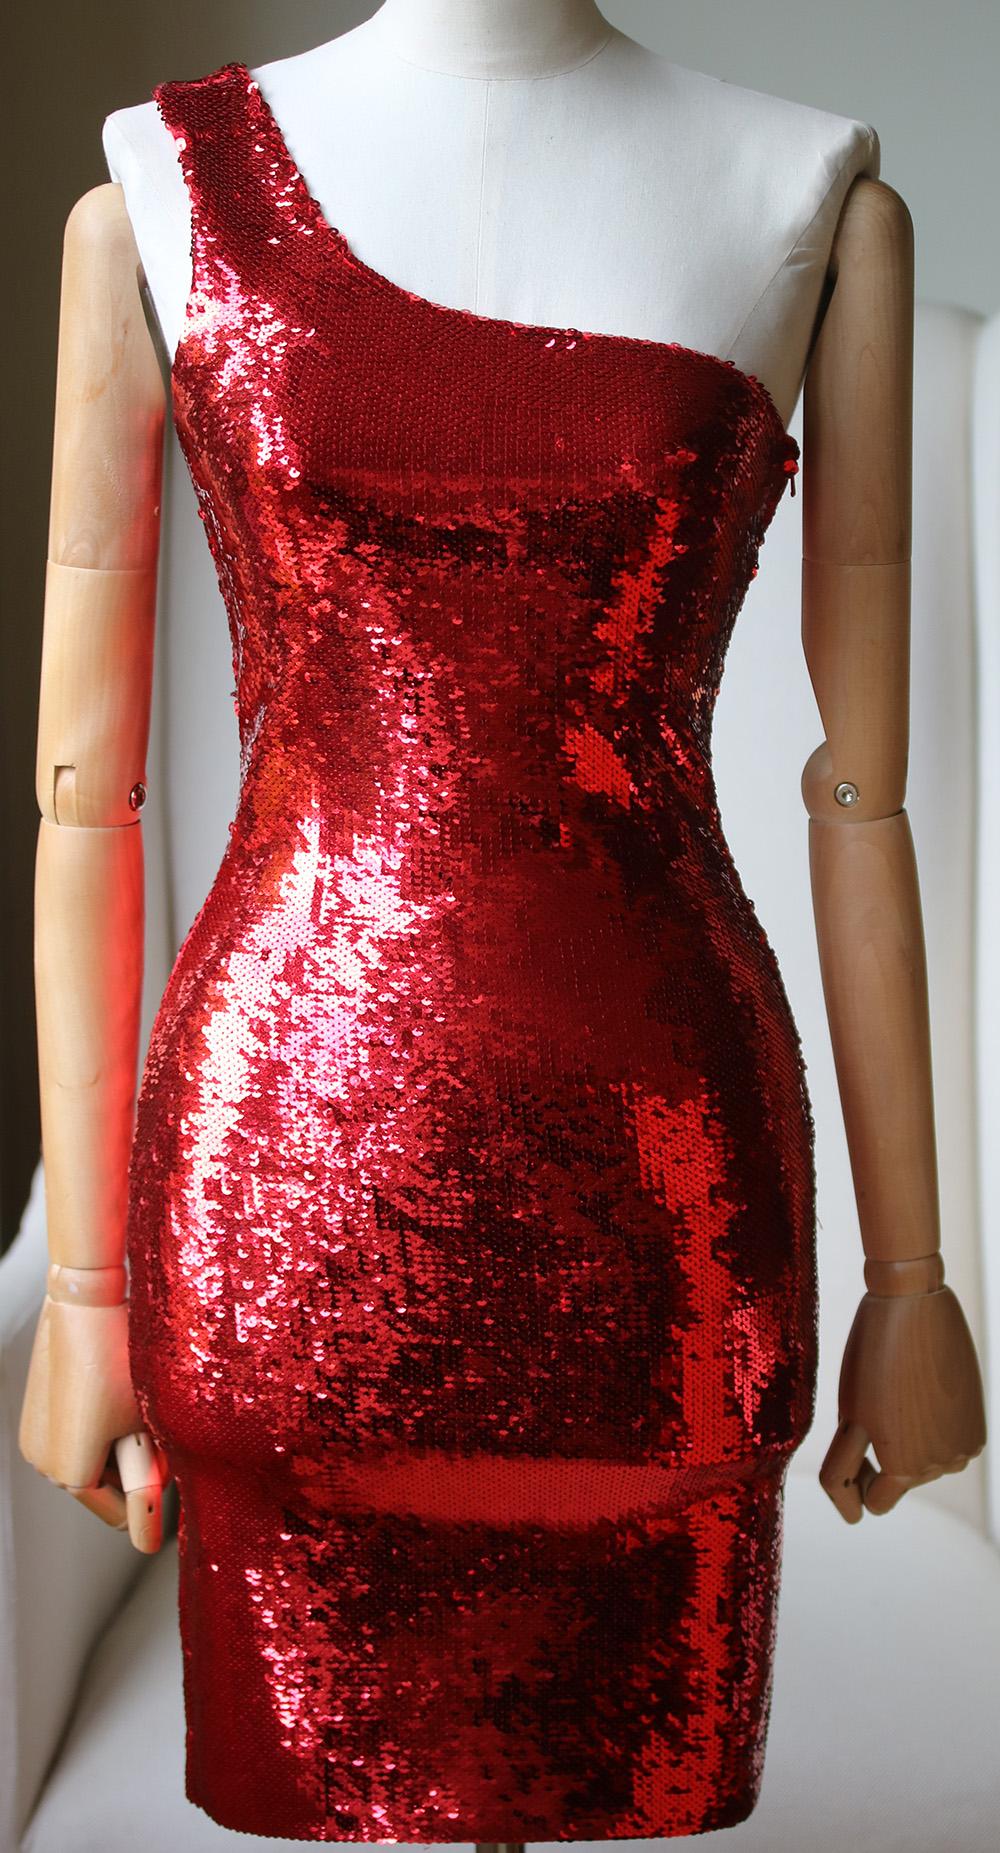 Embodying the label's rock'n'roll aesthetic, this thigh-skimming number by Saint Laurent ensures an all-eyes-on-you entrance. A body-con silhouette is finished with a one-shoulder neckline for a sexy, asymmetrical edge. Red sequins adorn the design